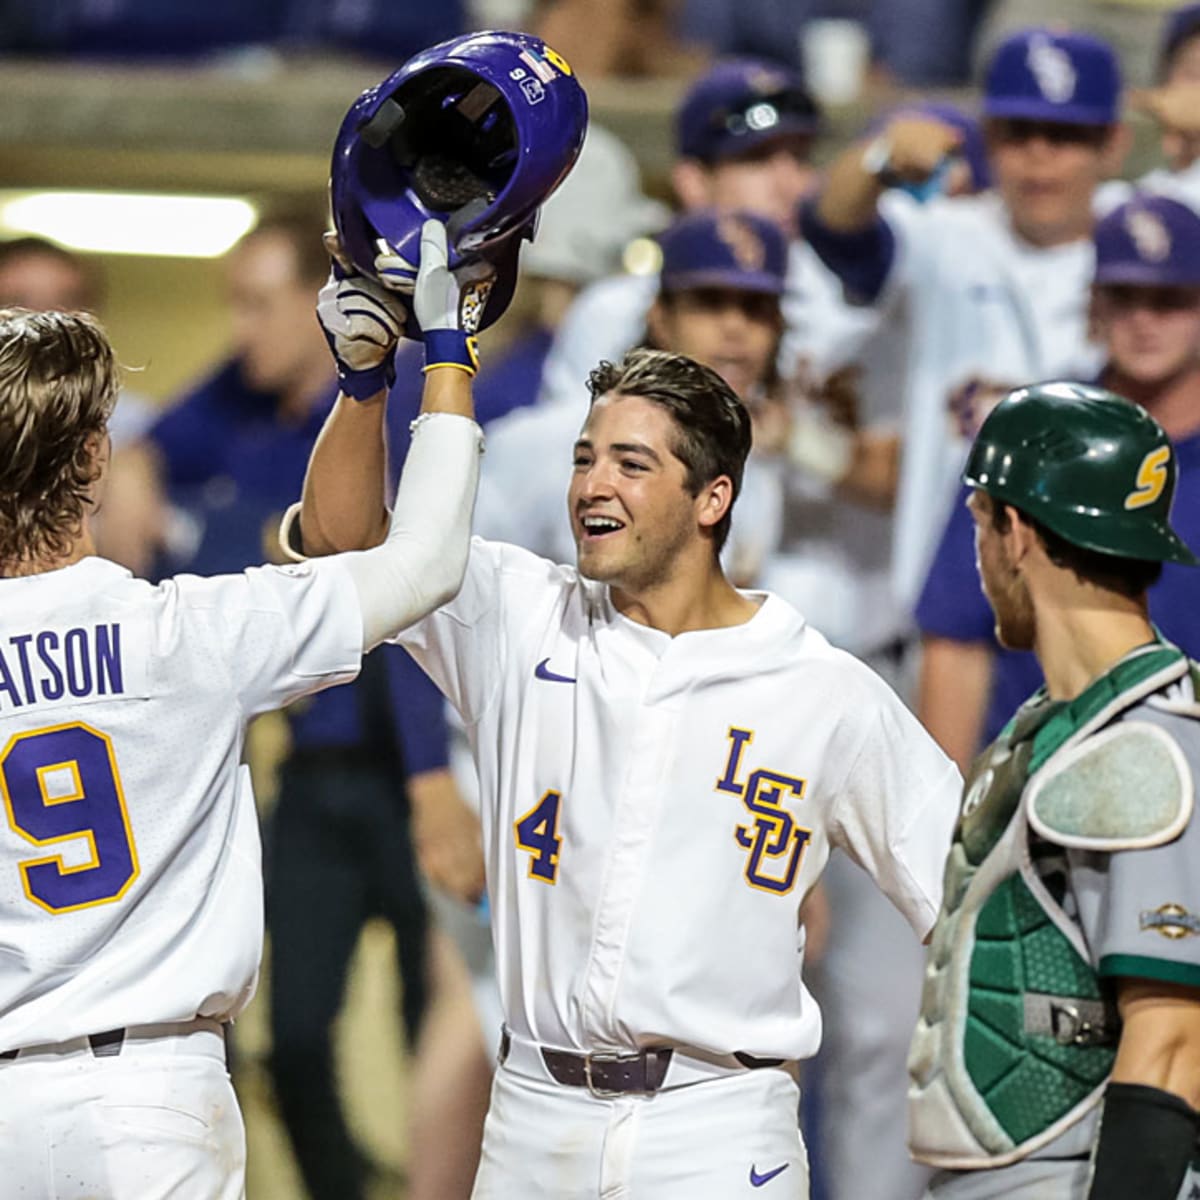 Preview: No. 1 Vols Baseball to Face 4-Seed LSU in Marquee SEC